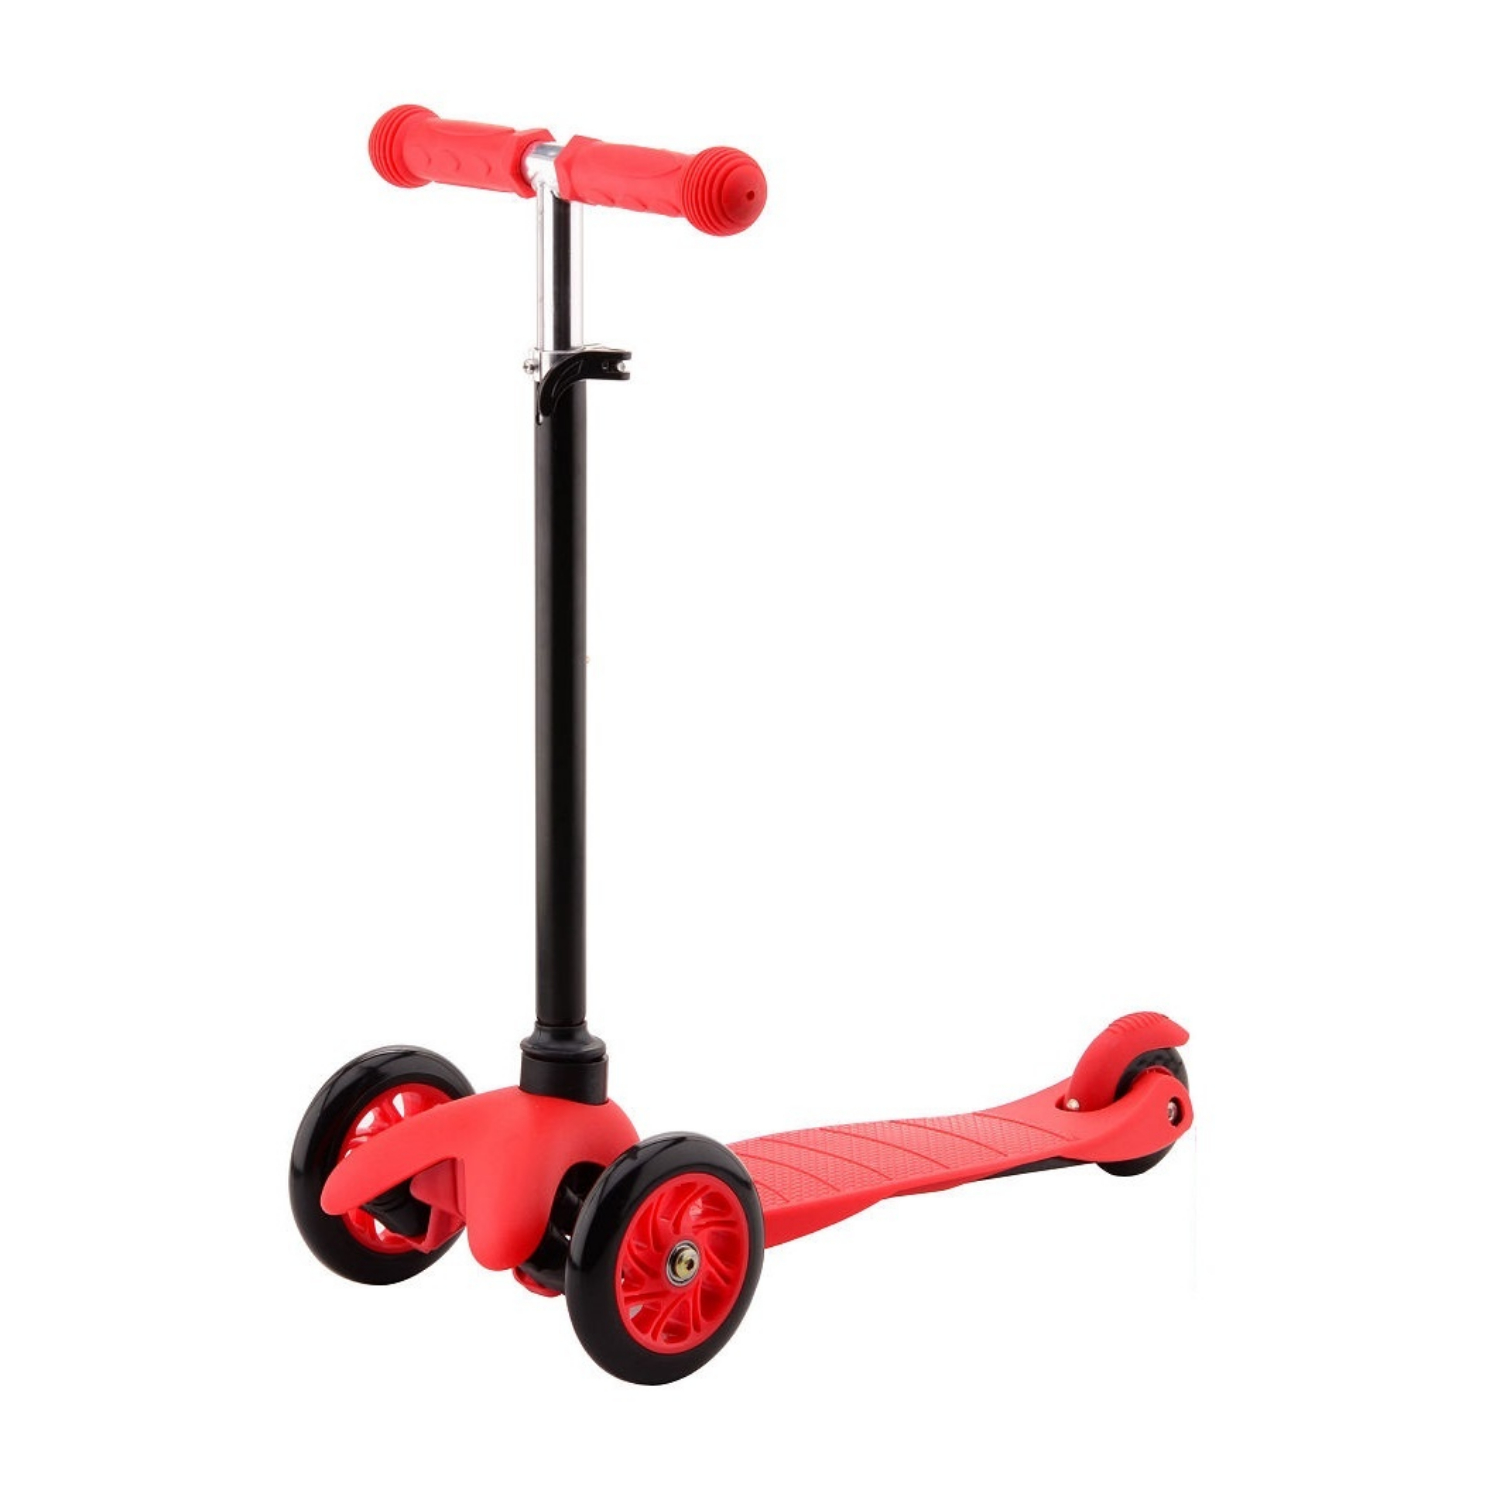 STEP SCOOTER DRIEWIEL ROOD - 702 0263